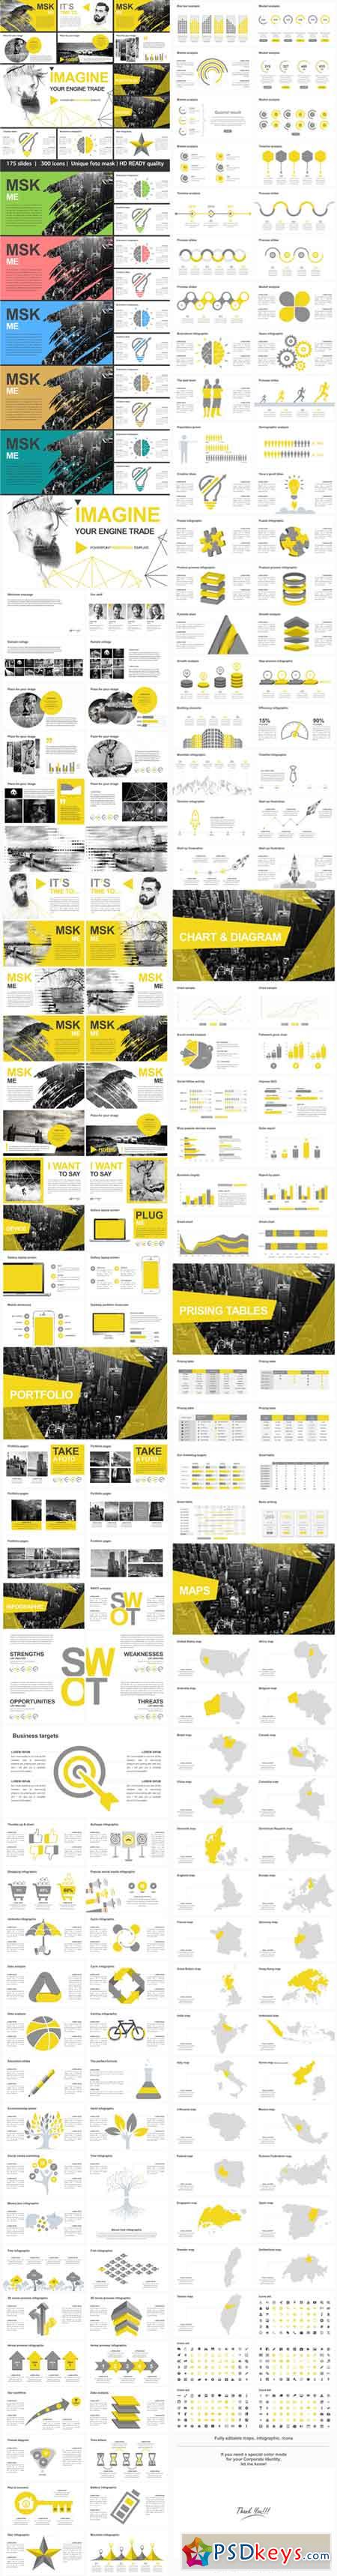 Imagine Clean Powerpoint Template 17310679